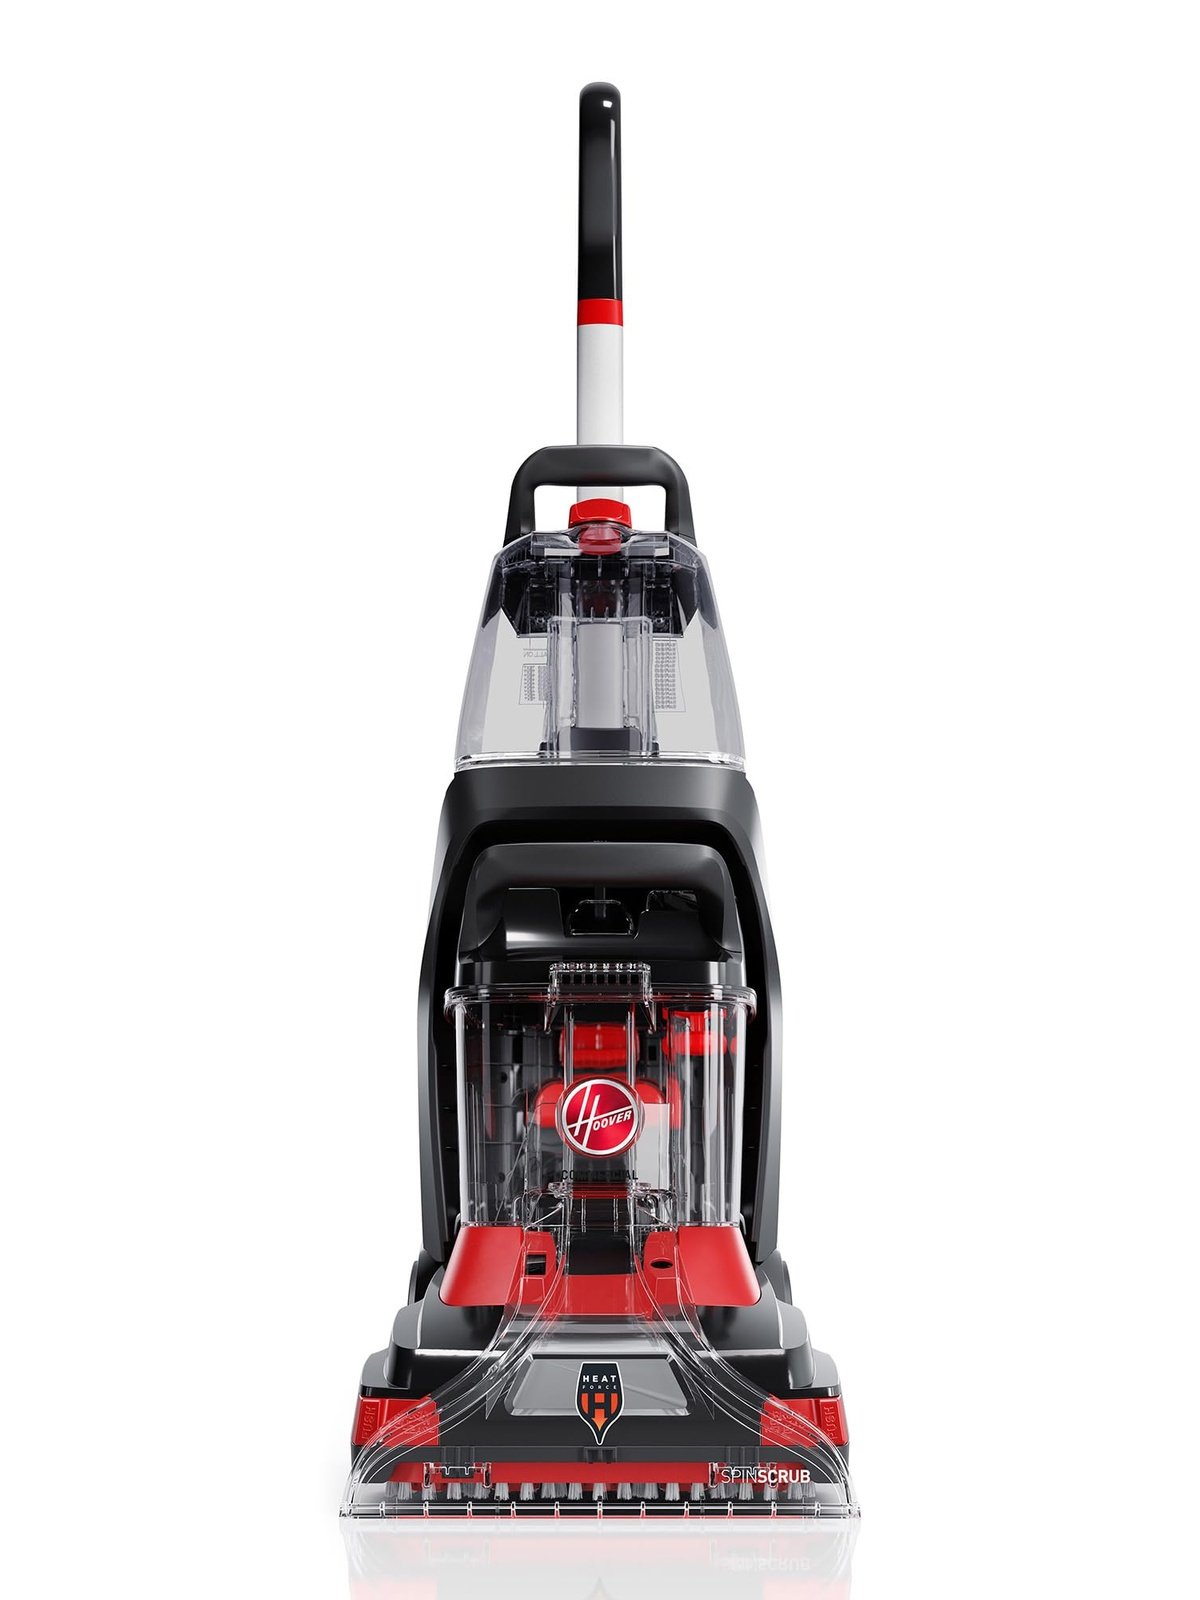 Hoover Commercial PowerScrub XL Spot Extractor, Carpet Cleaner Machine, Upright Shampooer, Commercial Grade Stain Remover, Powerful Deep Cleaner with Heated Drying, CH68000V, Black